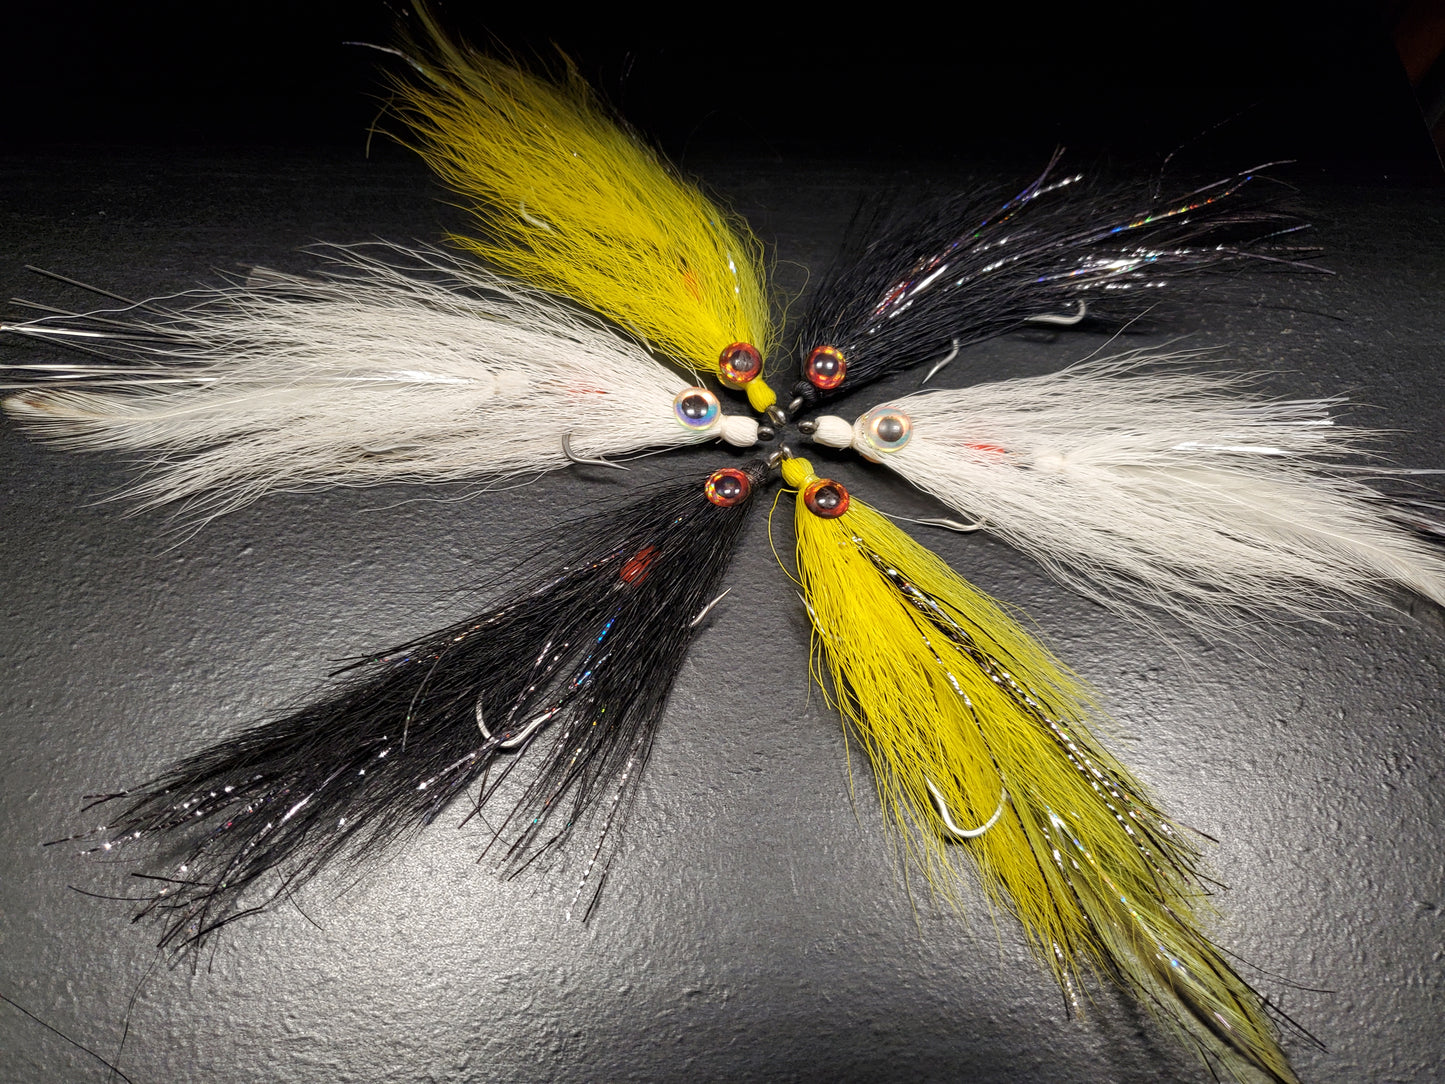 Articulated Deceiver 6 Fly Selection, Lefty's Deceiver, Articulated Deceiver Streamer Fly